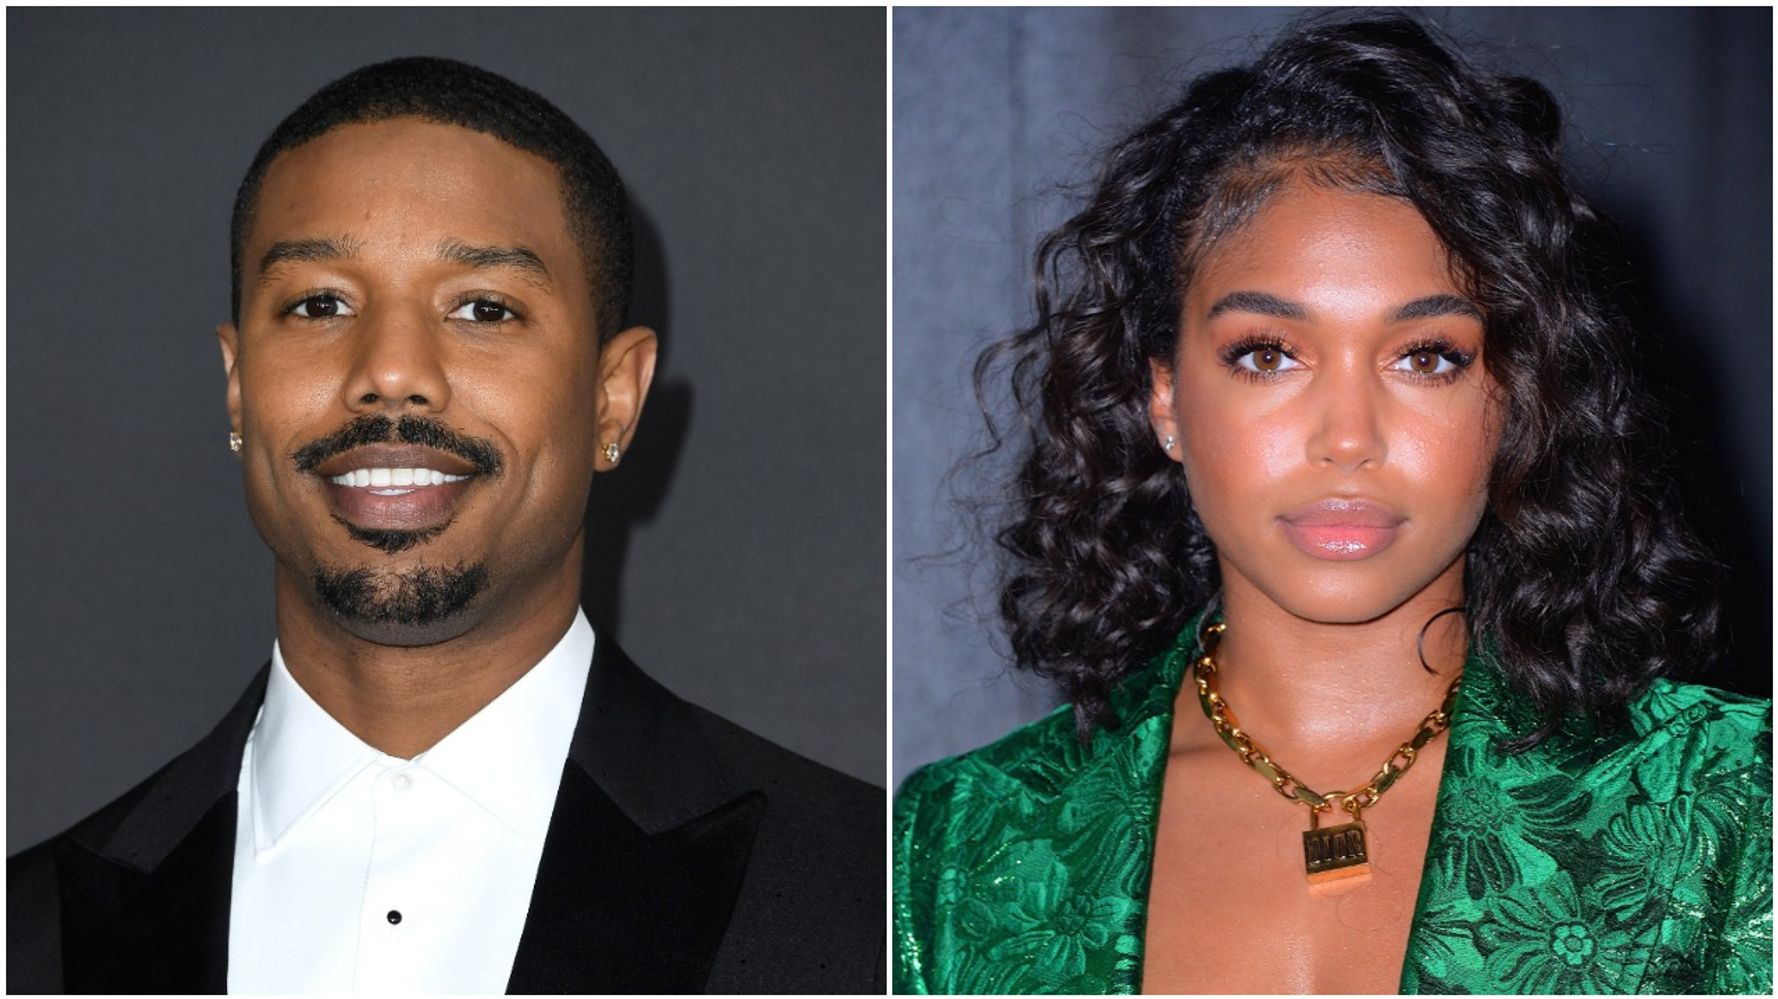 Michael B. Jordan Gushes Over Lori Harvey In New Interview About Their Relationship